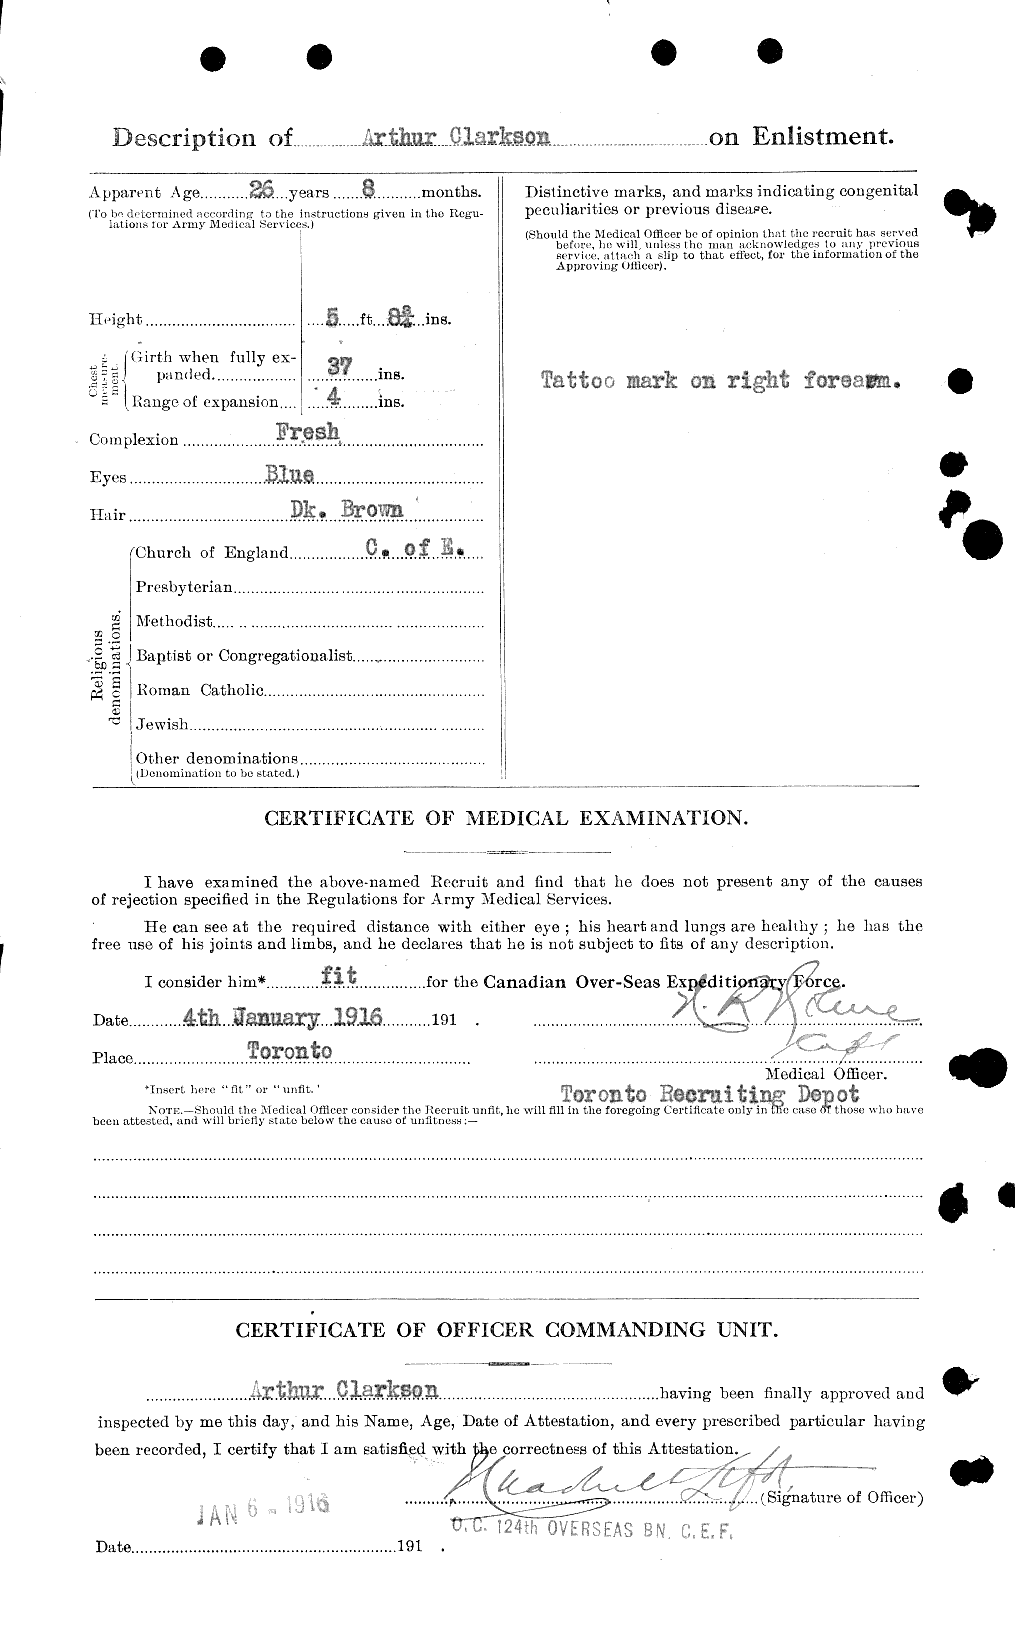 Personnel Records of the First World War - CEF 023616b